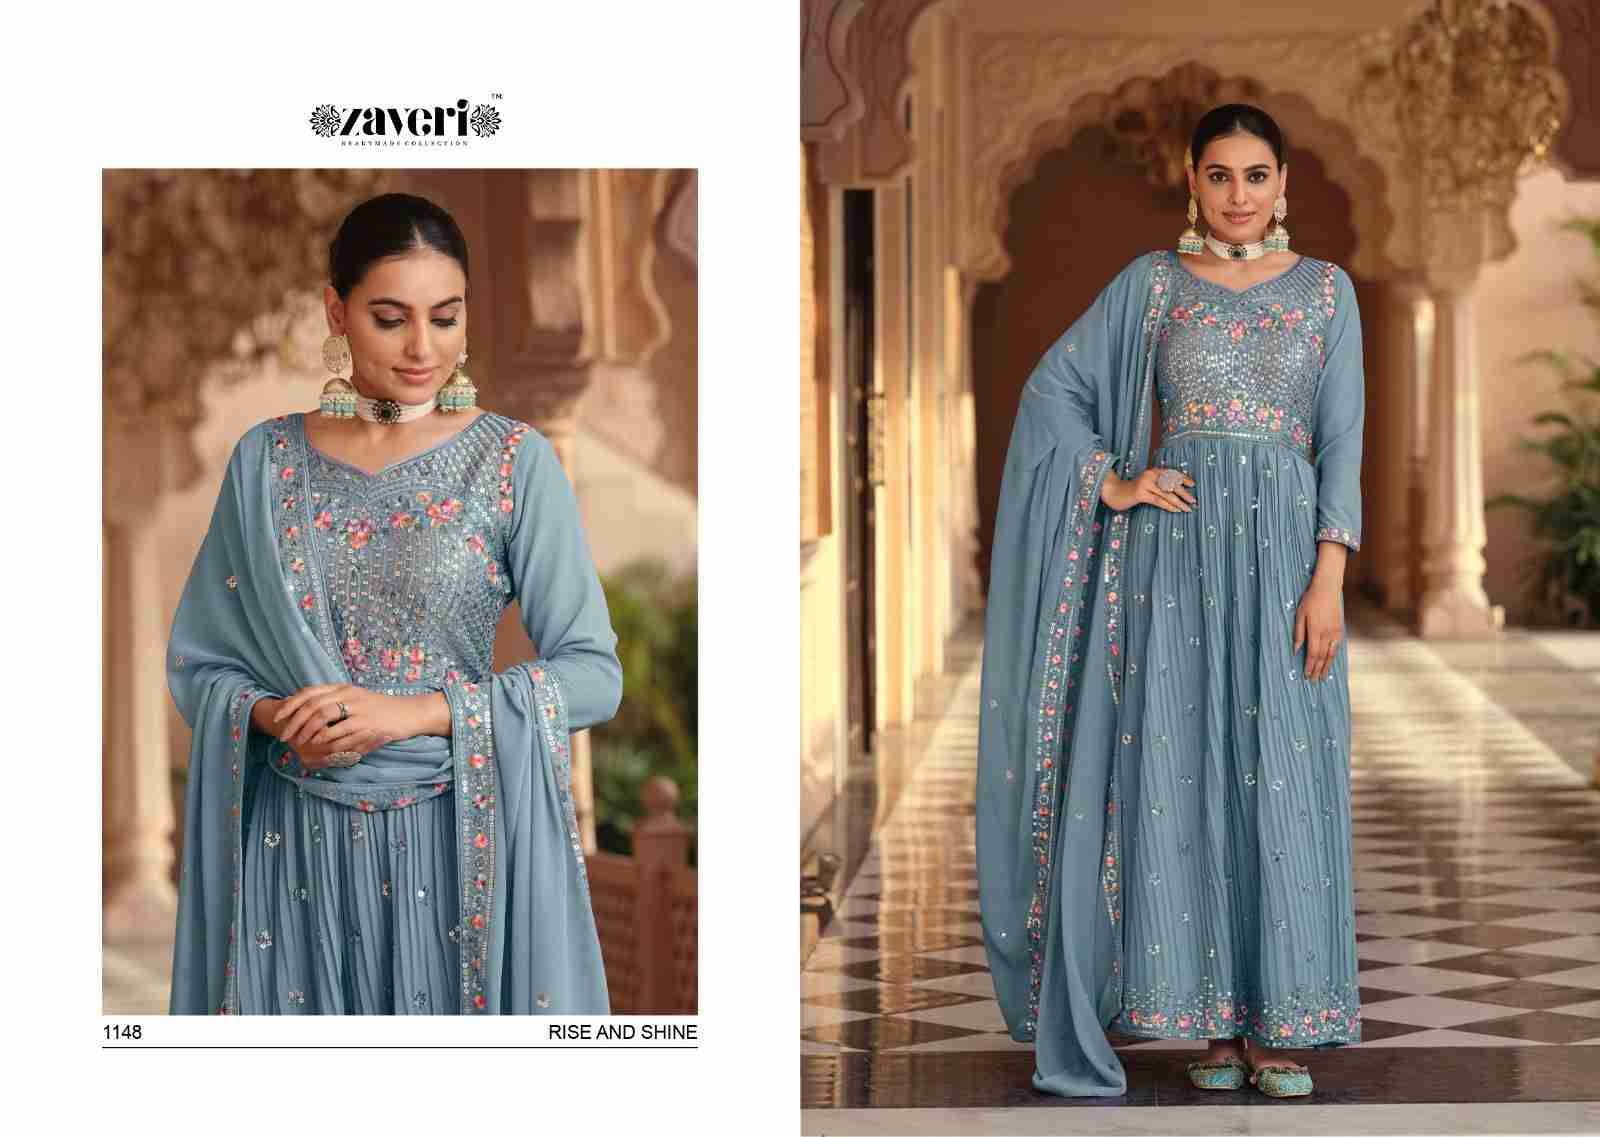 Apsara By Zaveri 1145 To 1148 Series Beautiful Stylish Fancy Colorful Casual Wear & Ethnic Wear Georgette Embroidery Gowns With Dupatta At Wholesale Price